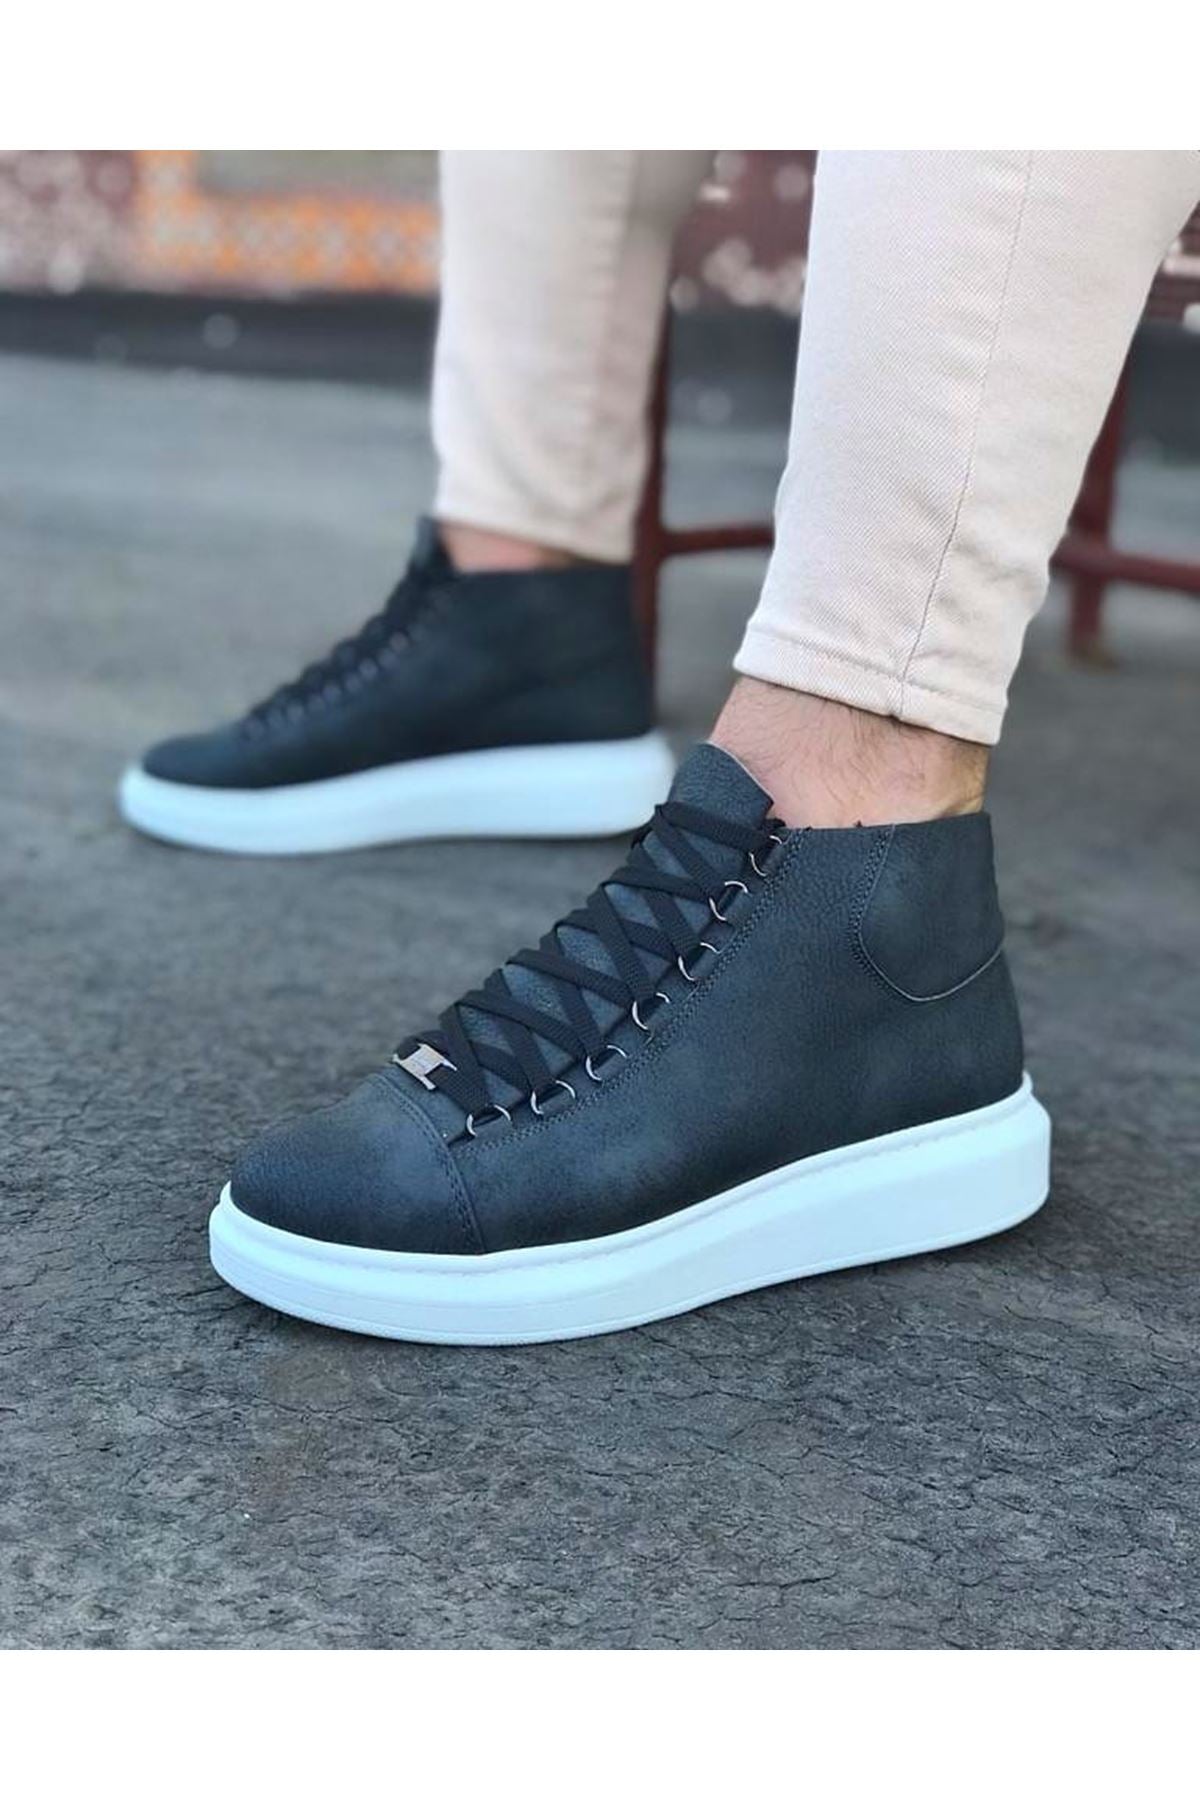 WG032 Gray Lace-up Sneakers Half Ankle Boots - STREETMODE ™